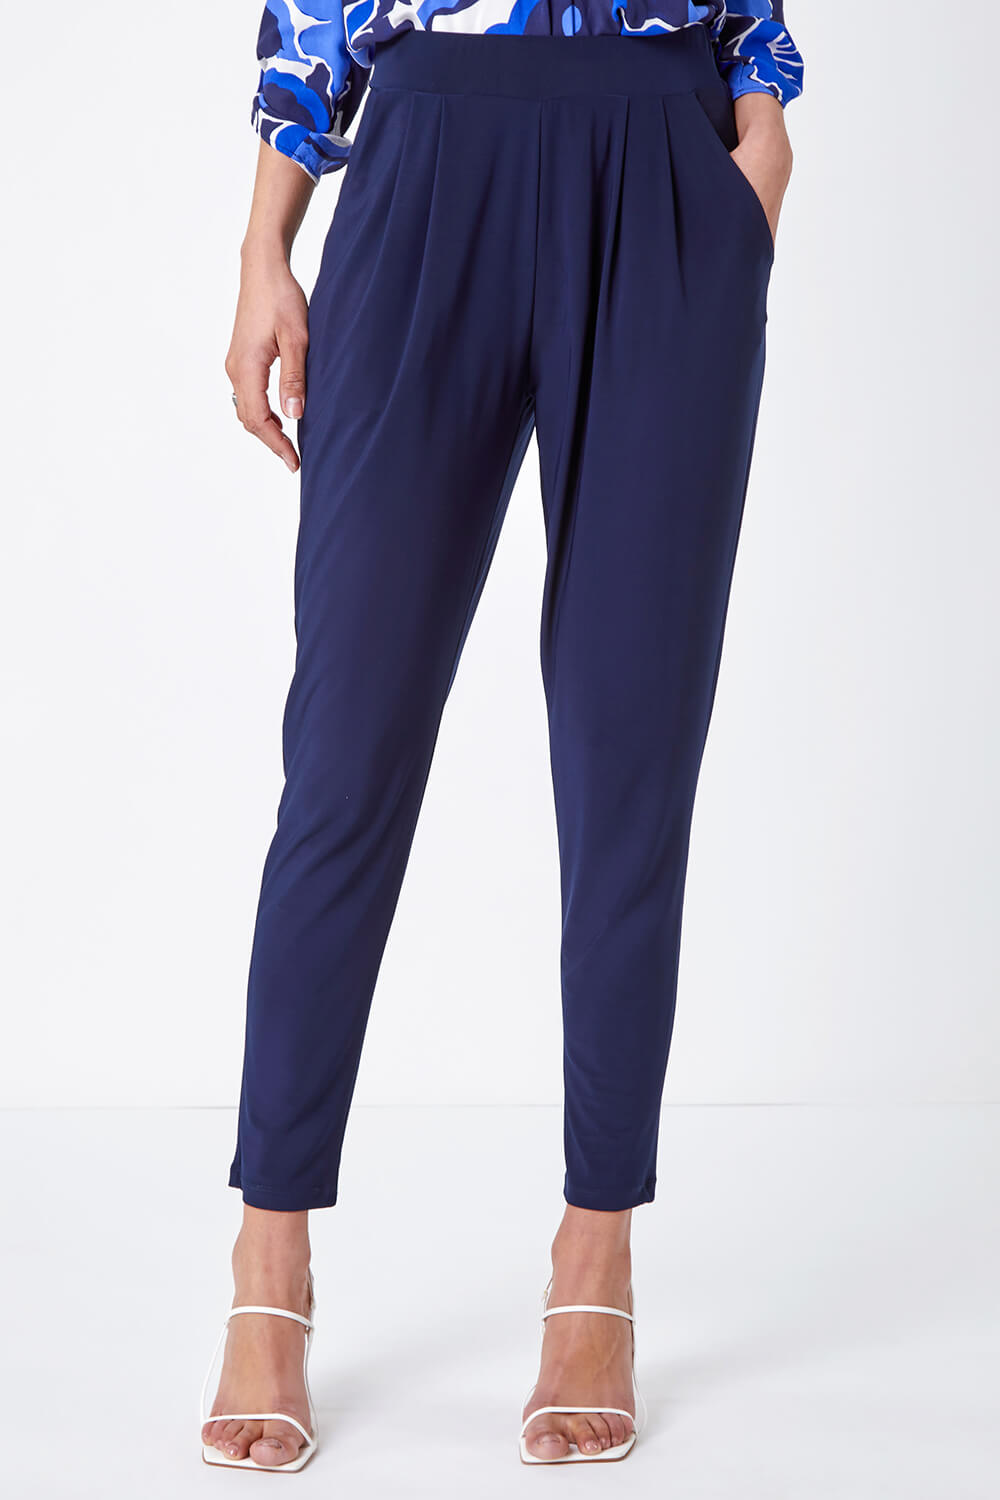 Navy  Jersey Stretch Harem Trousers, Image 2 of 6